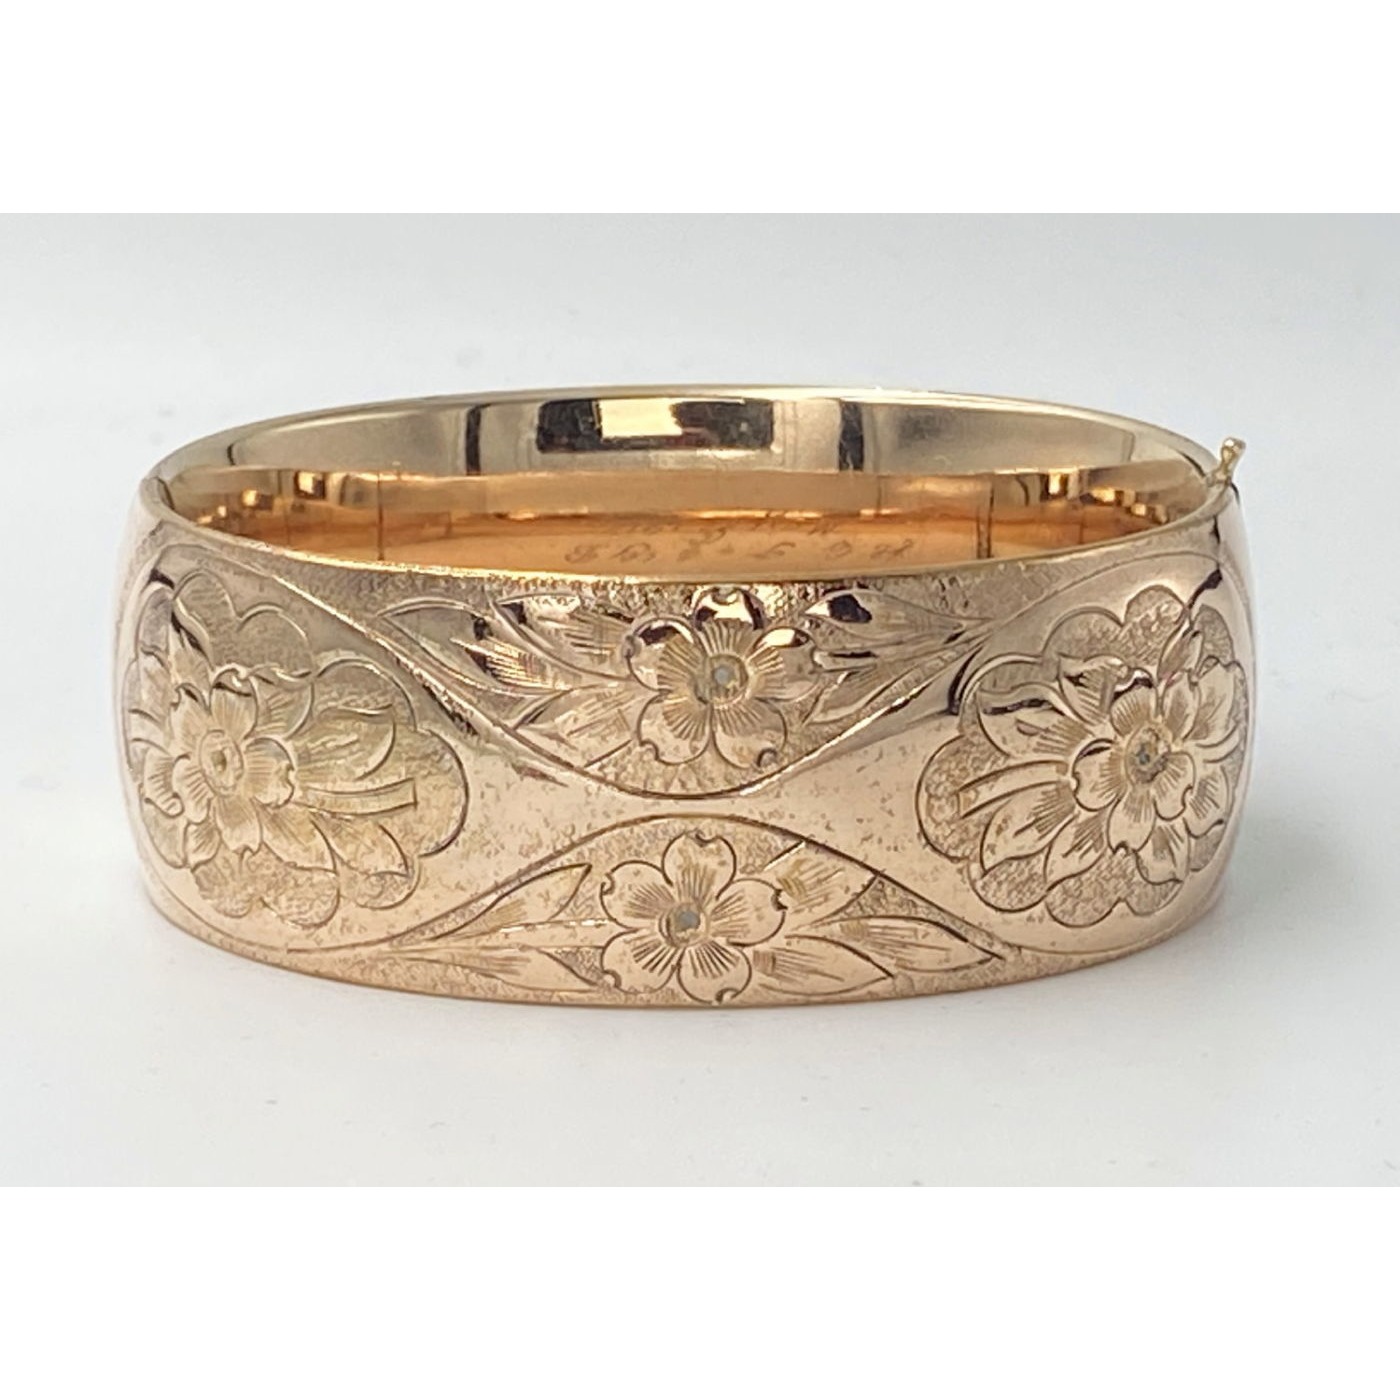 Smaller Wrist Extra Wide Exceptional Floral Covered Engagement Bangle